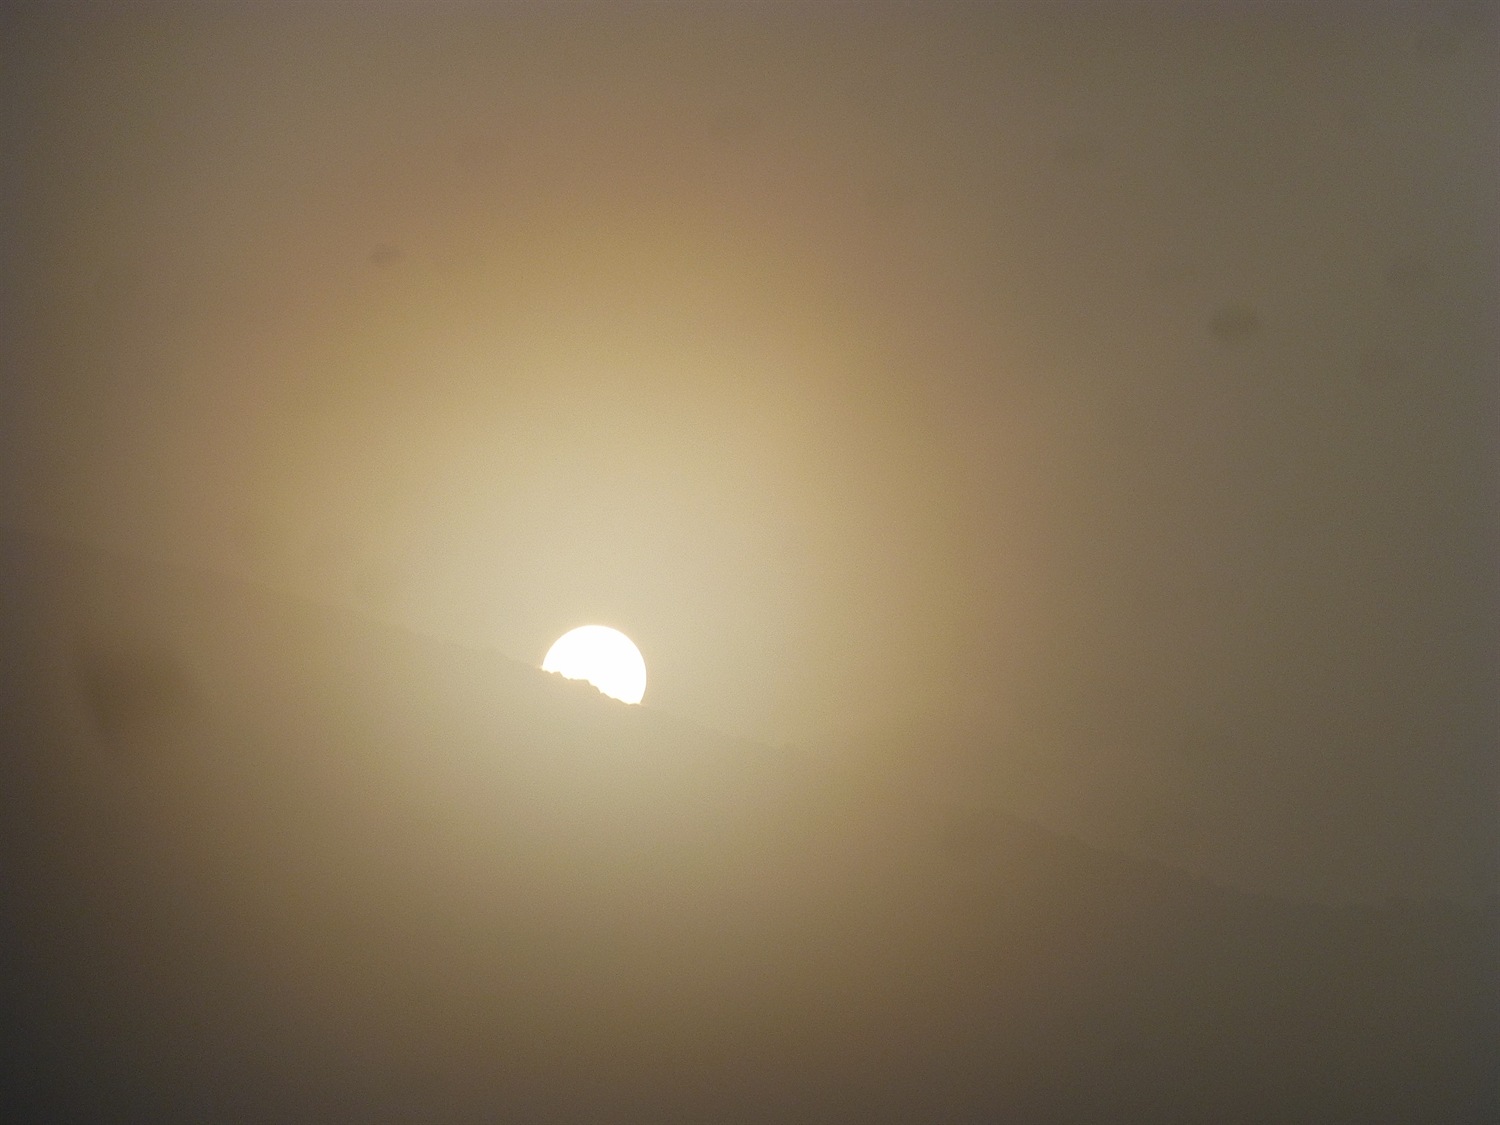 The sun tried to get his hat on but was beaten by the mist